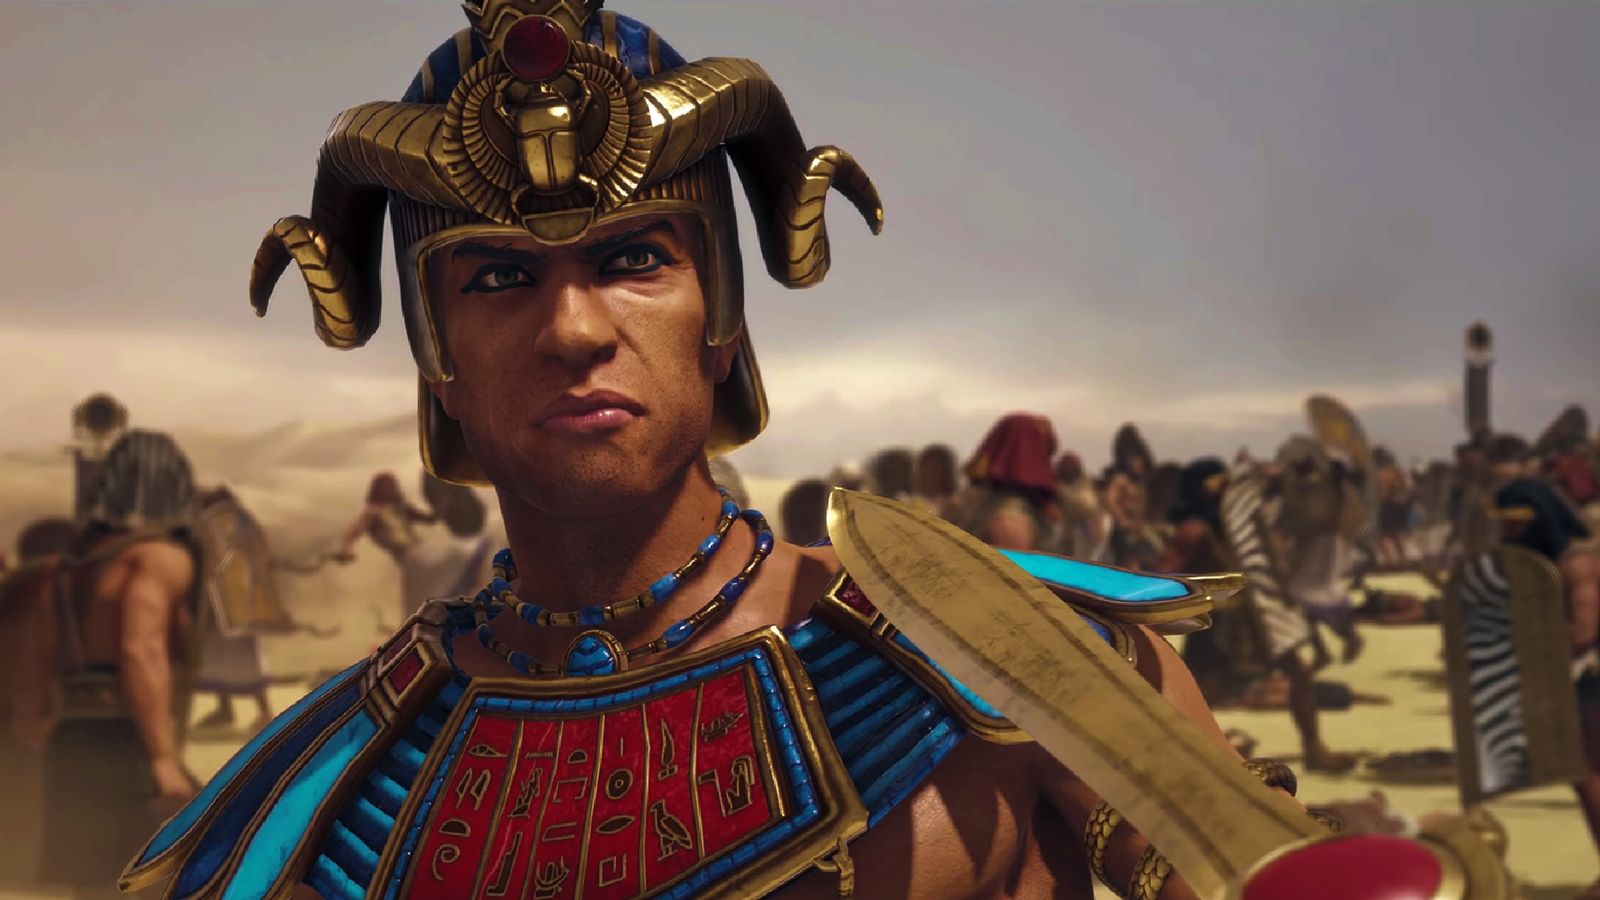 Total War: Pharaoh factions - Who are they and how to play them